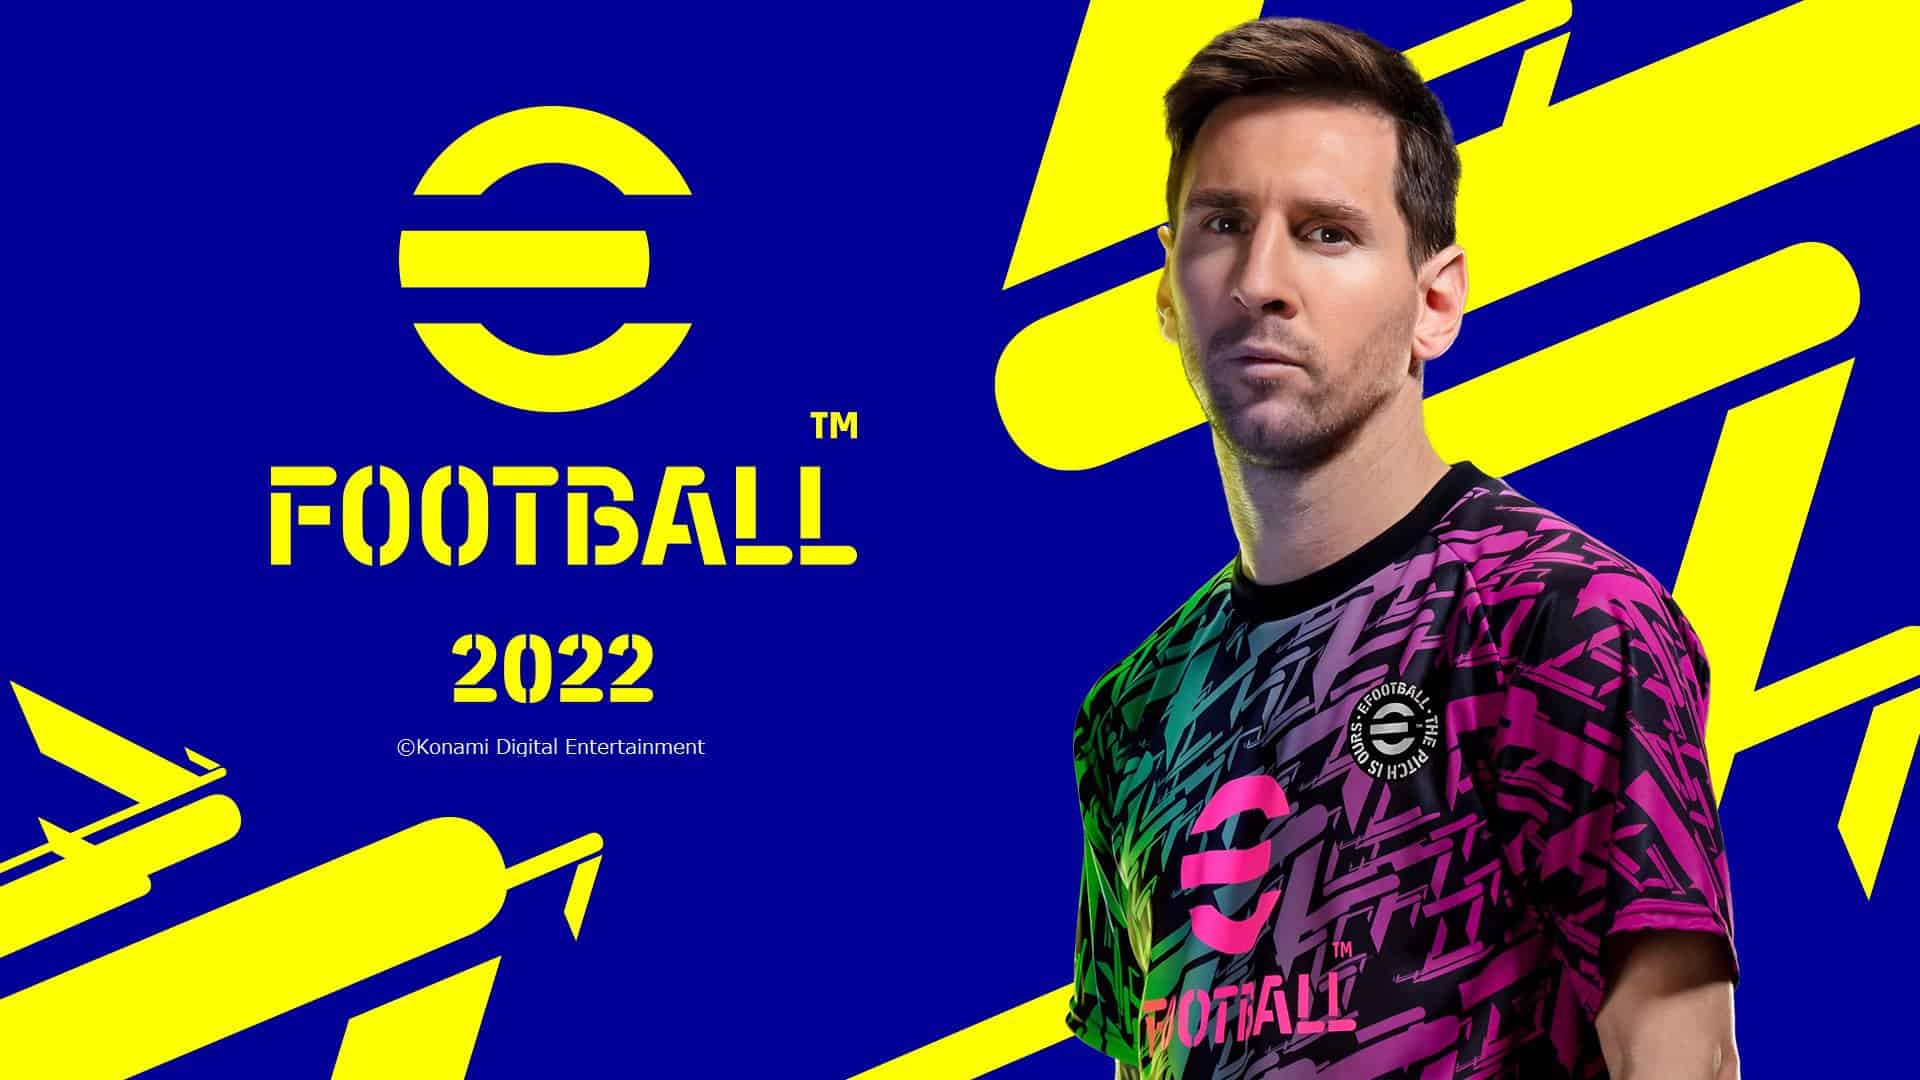 Konami issues official apology on eFootball 2022’s troubled launch